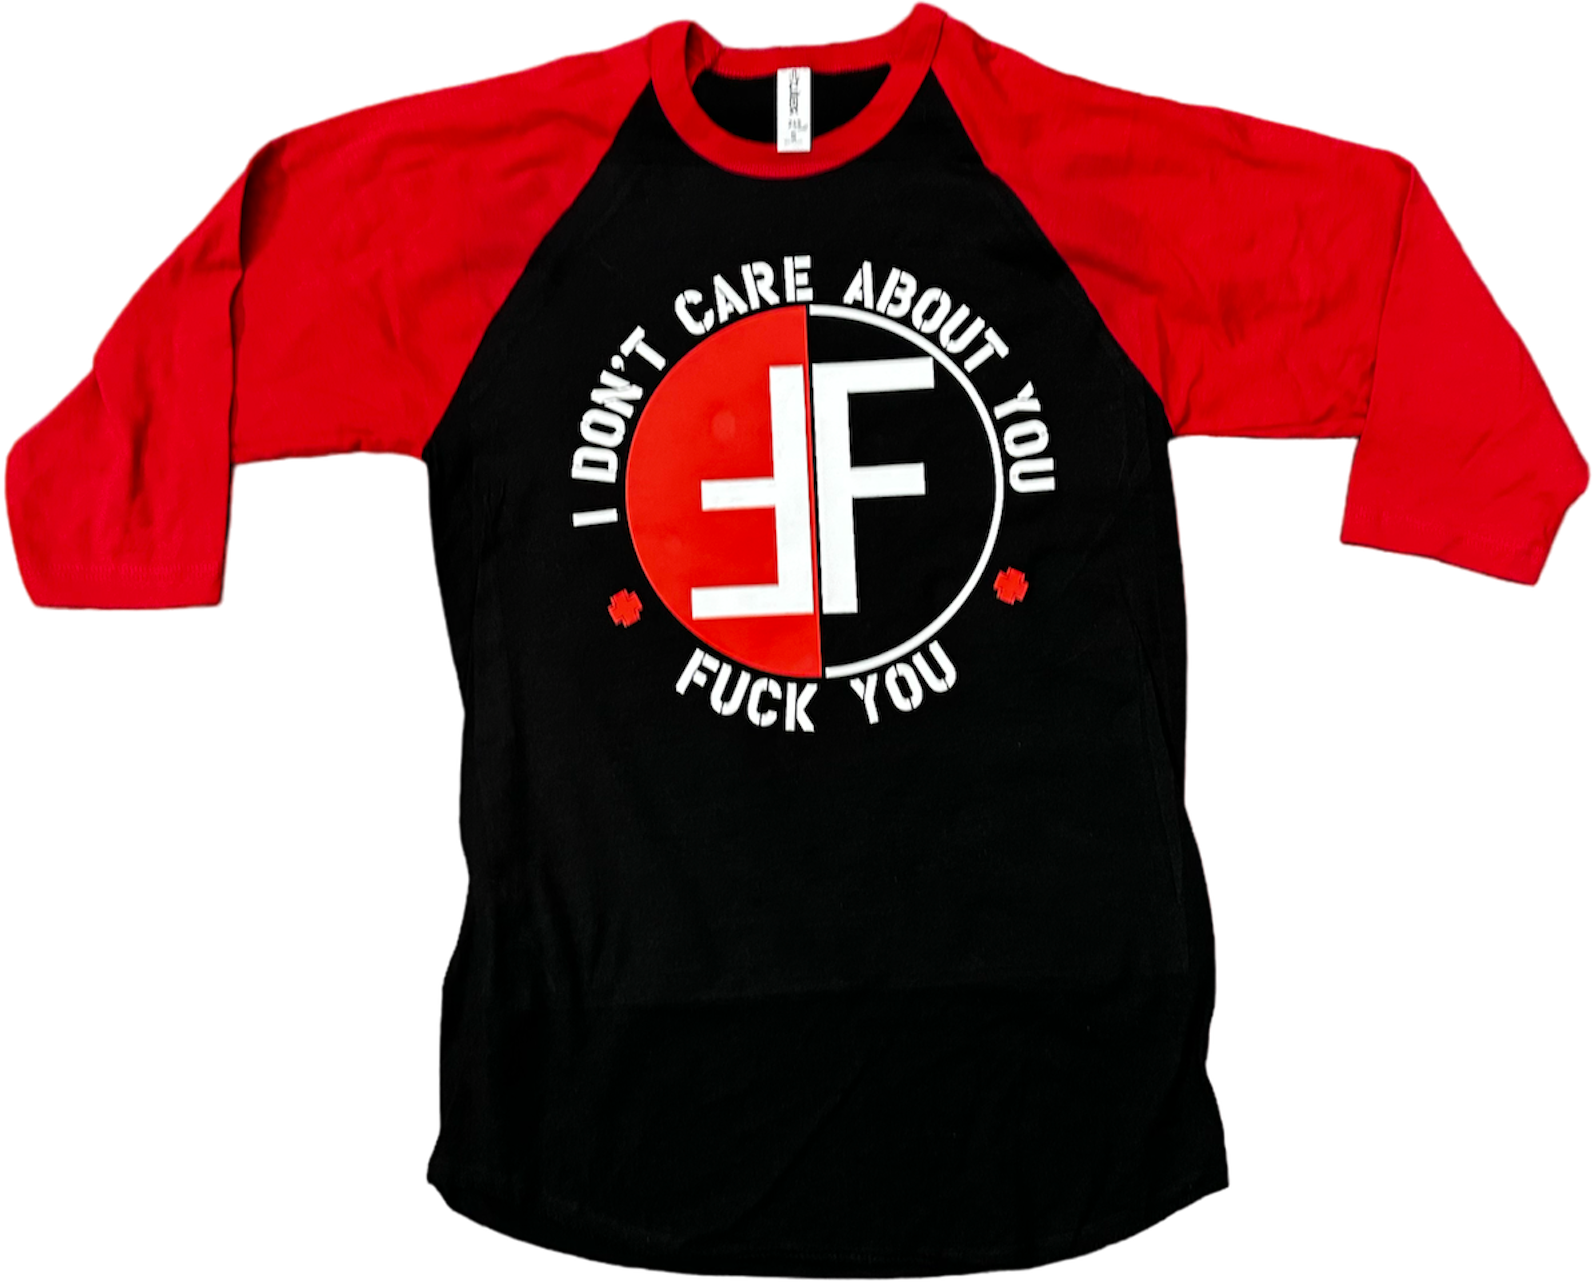 FEAR "I DON'T CARE ABOUT YOU" 3/4 SLEEVE RAGLAN